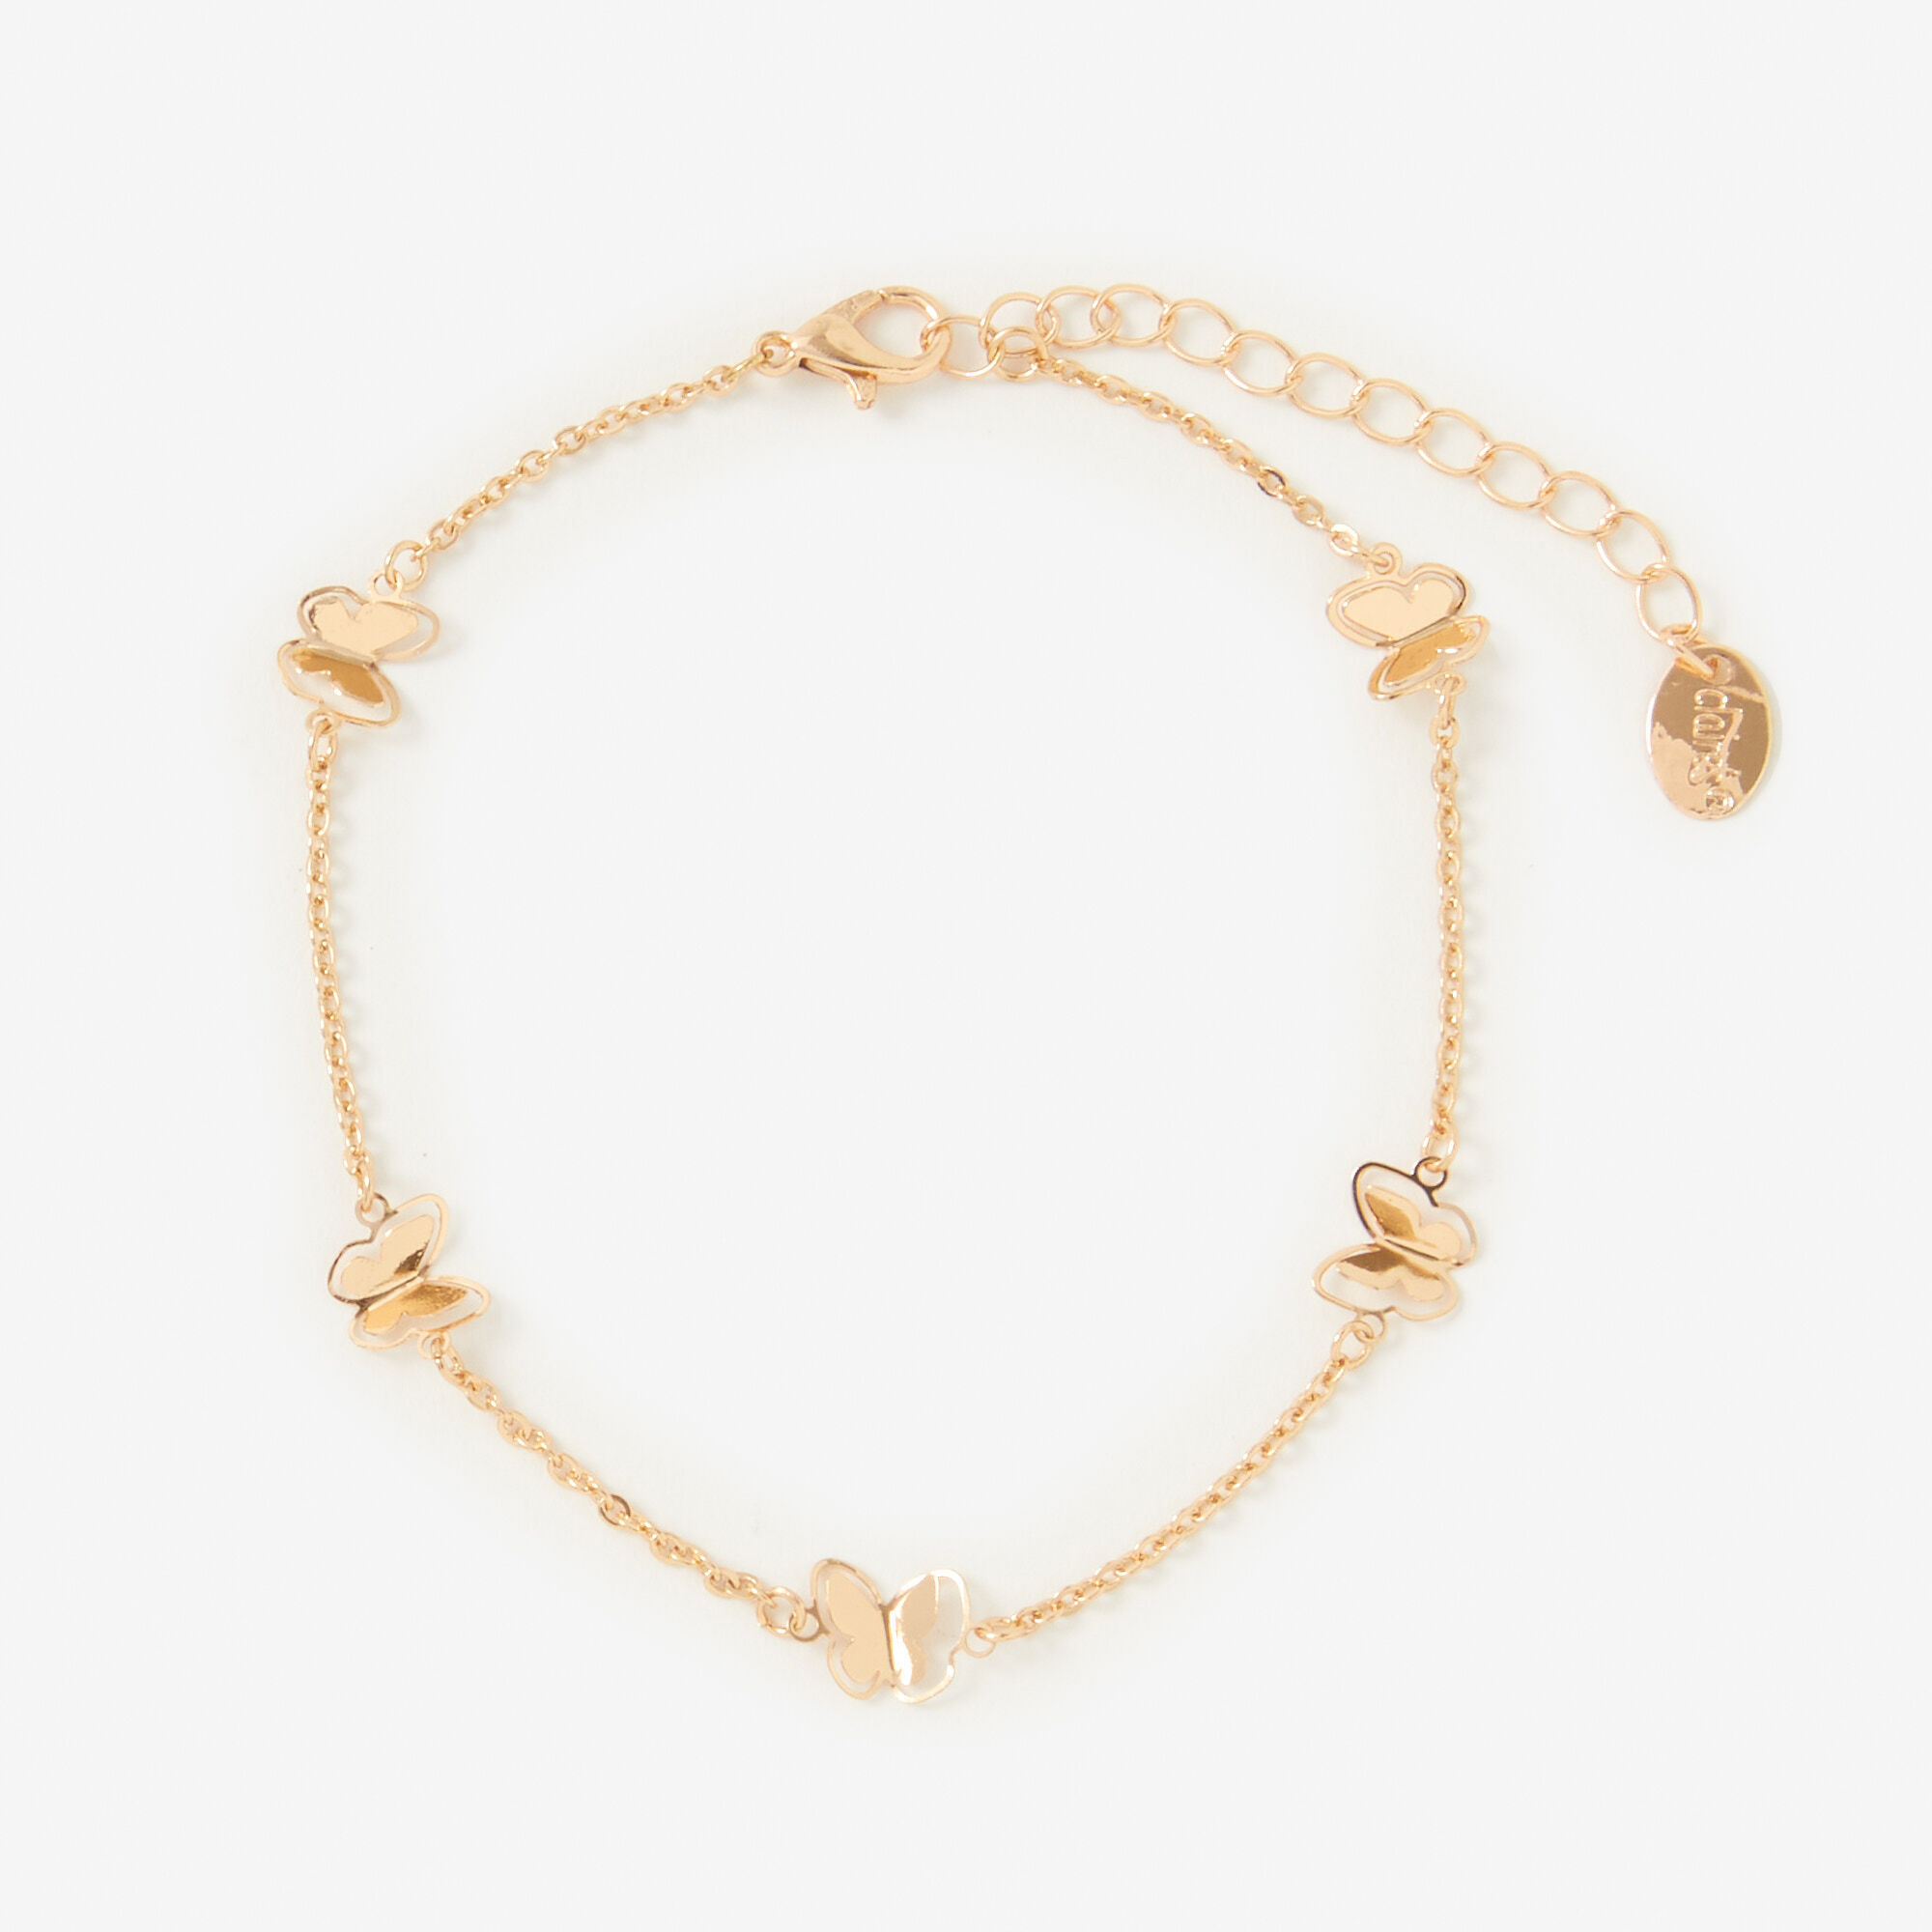 Mixed Metal Chain Anklets - 3 Pack | Claire's US